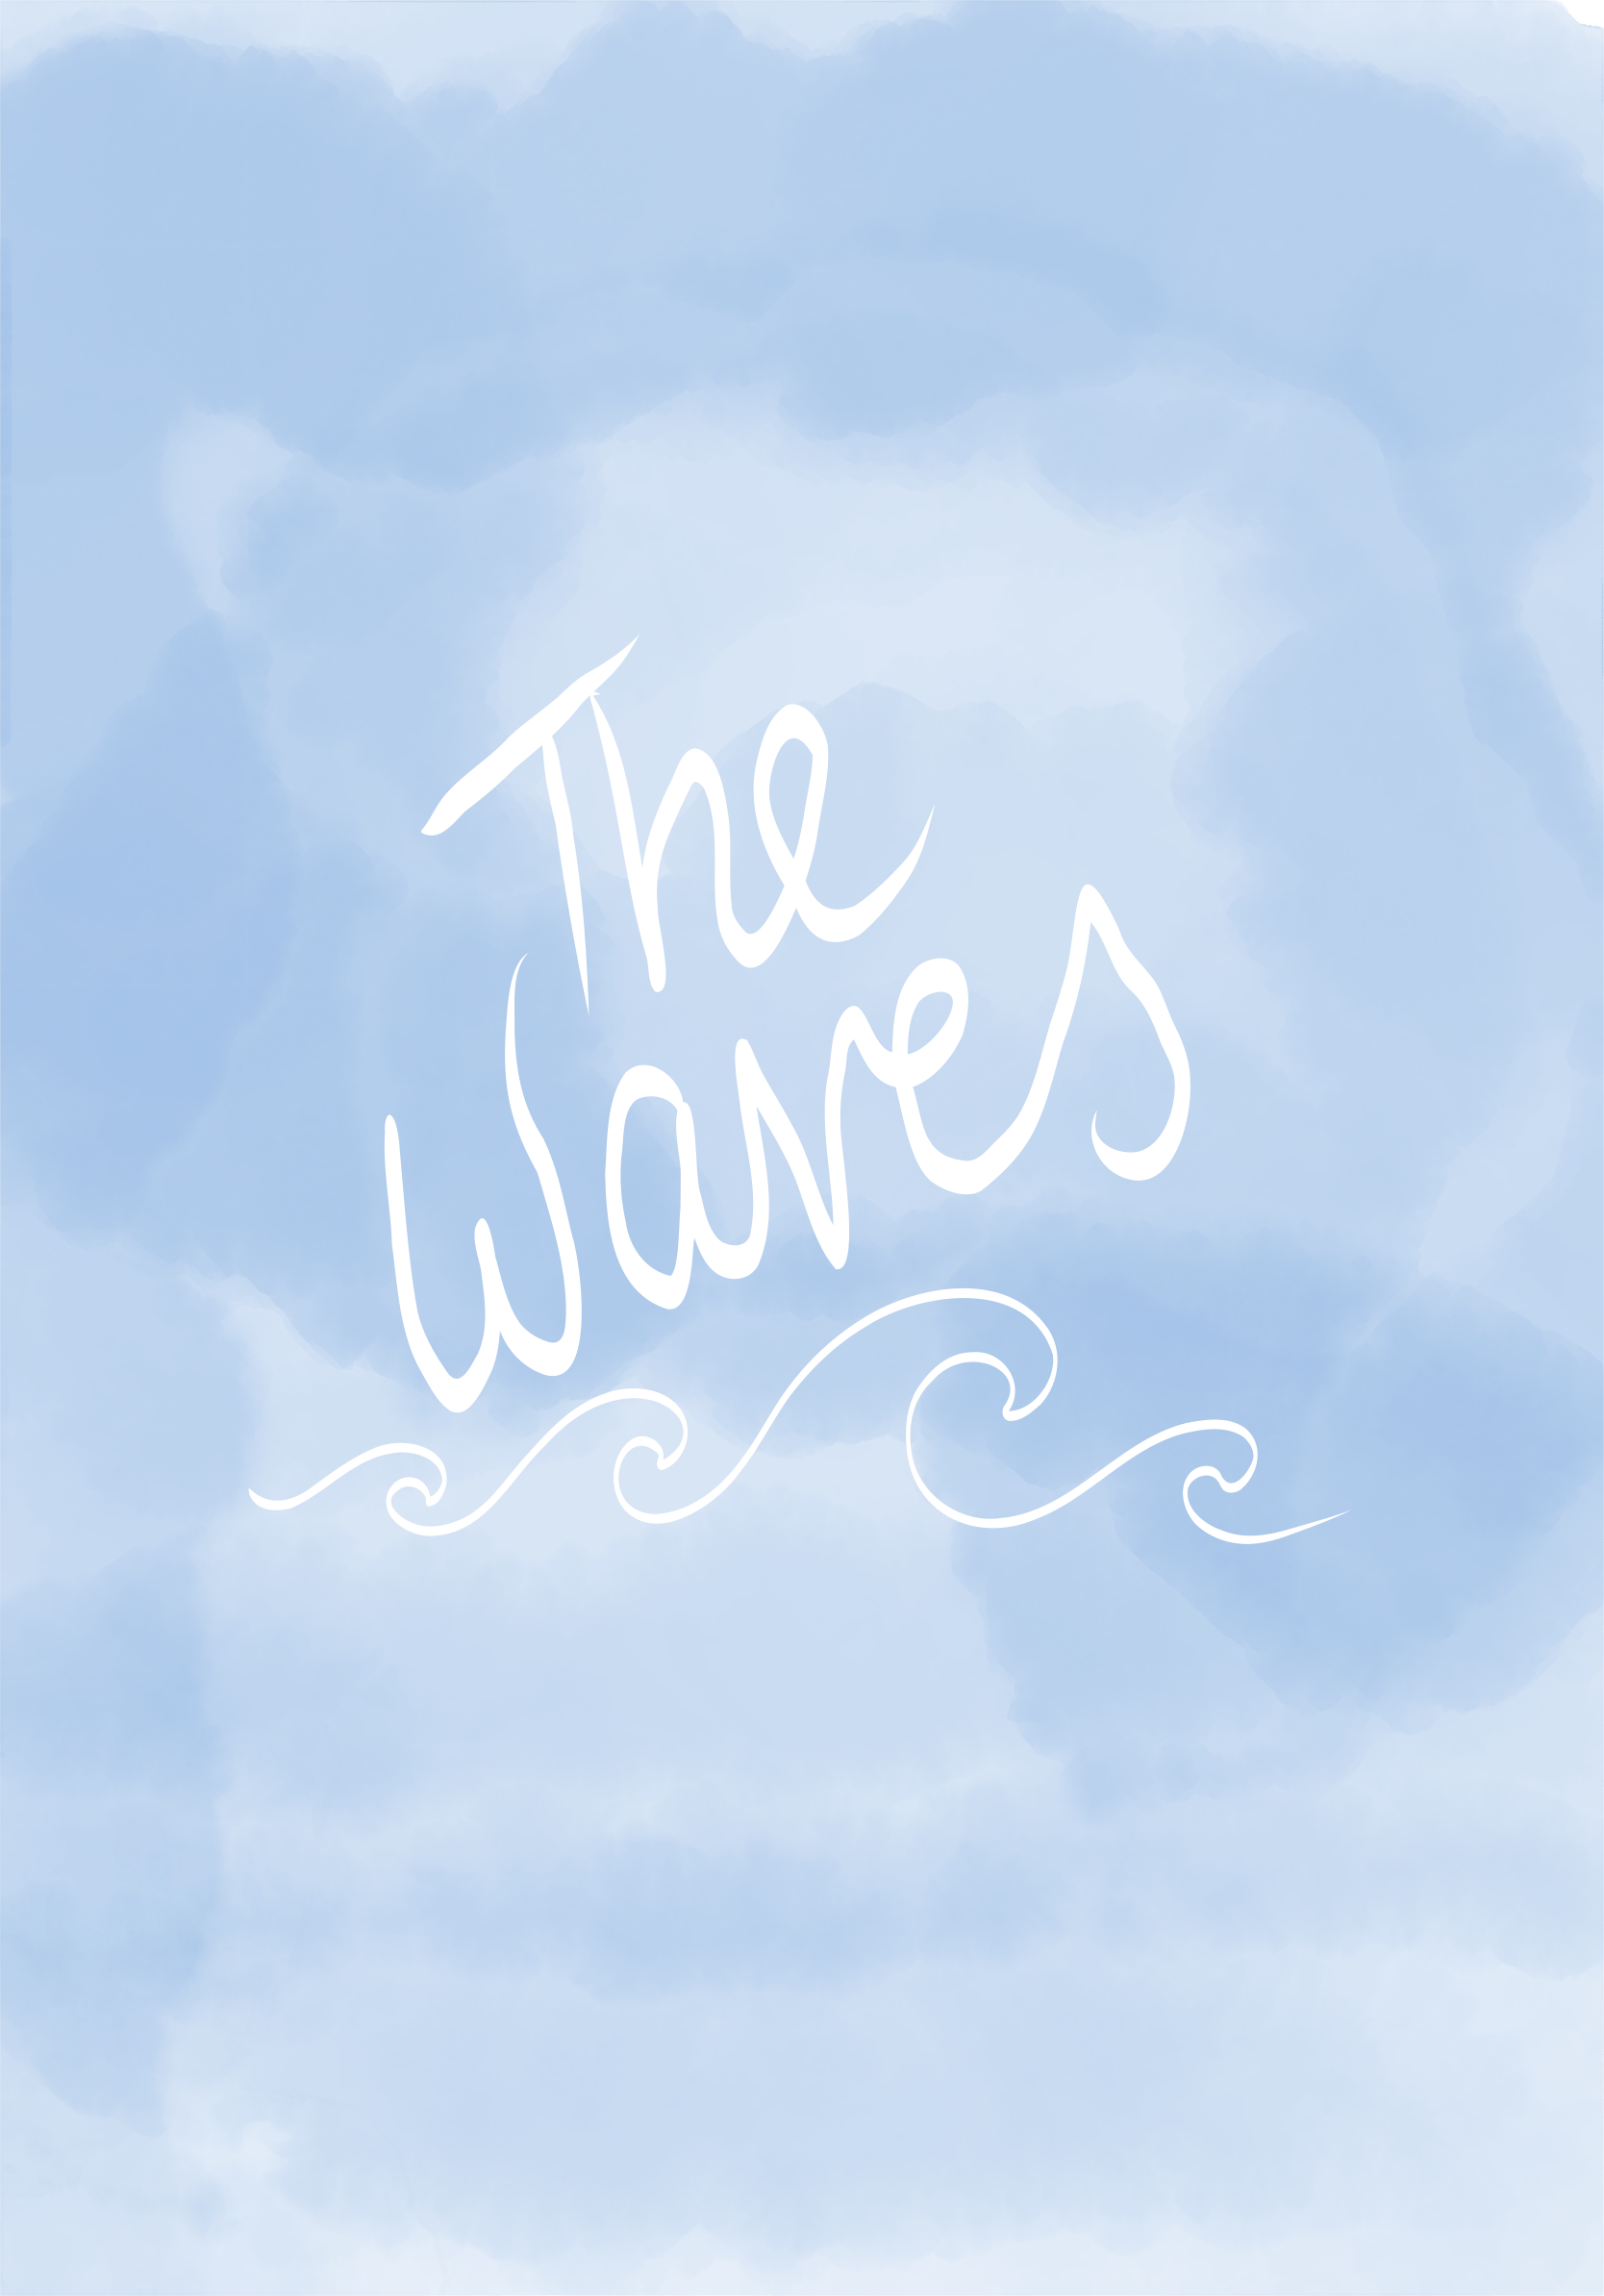 The Waves by Nur